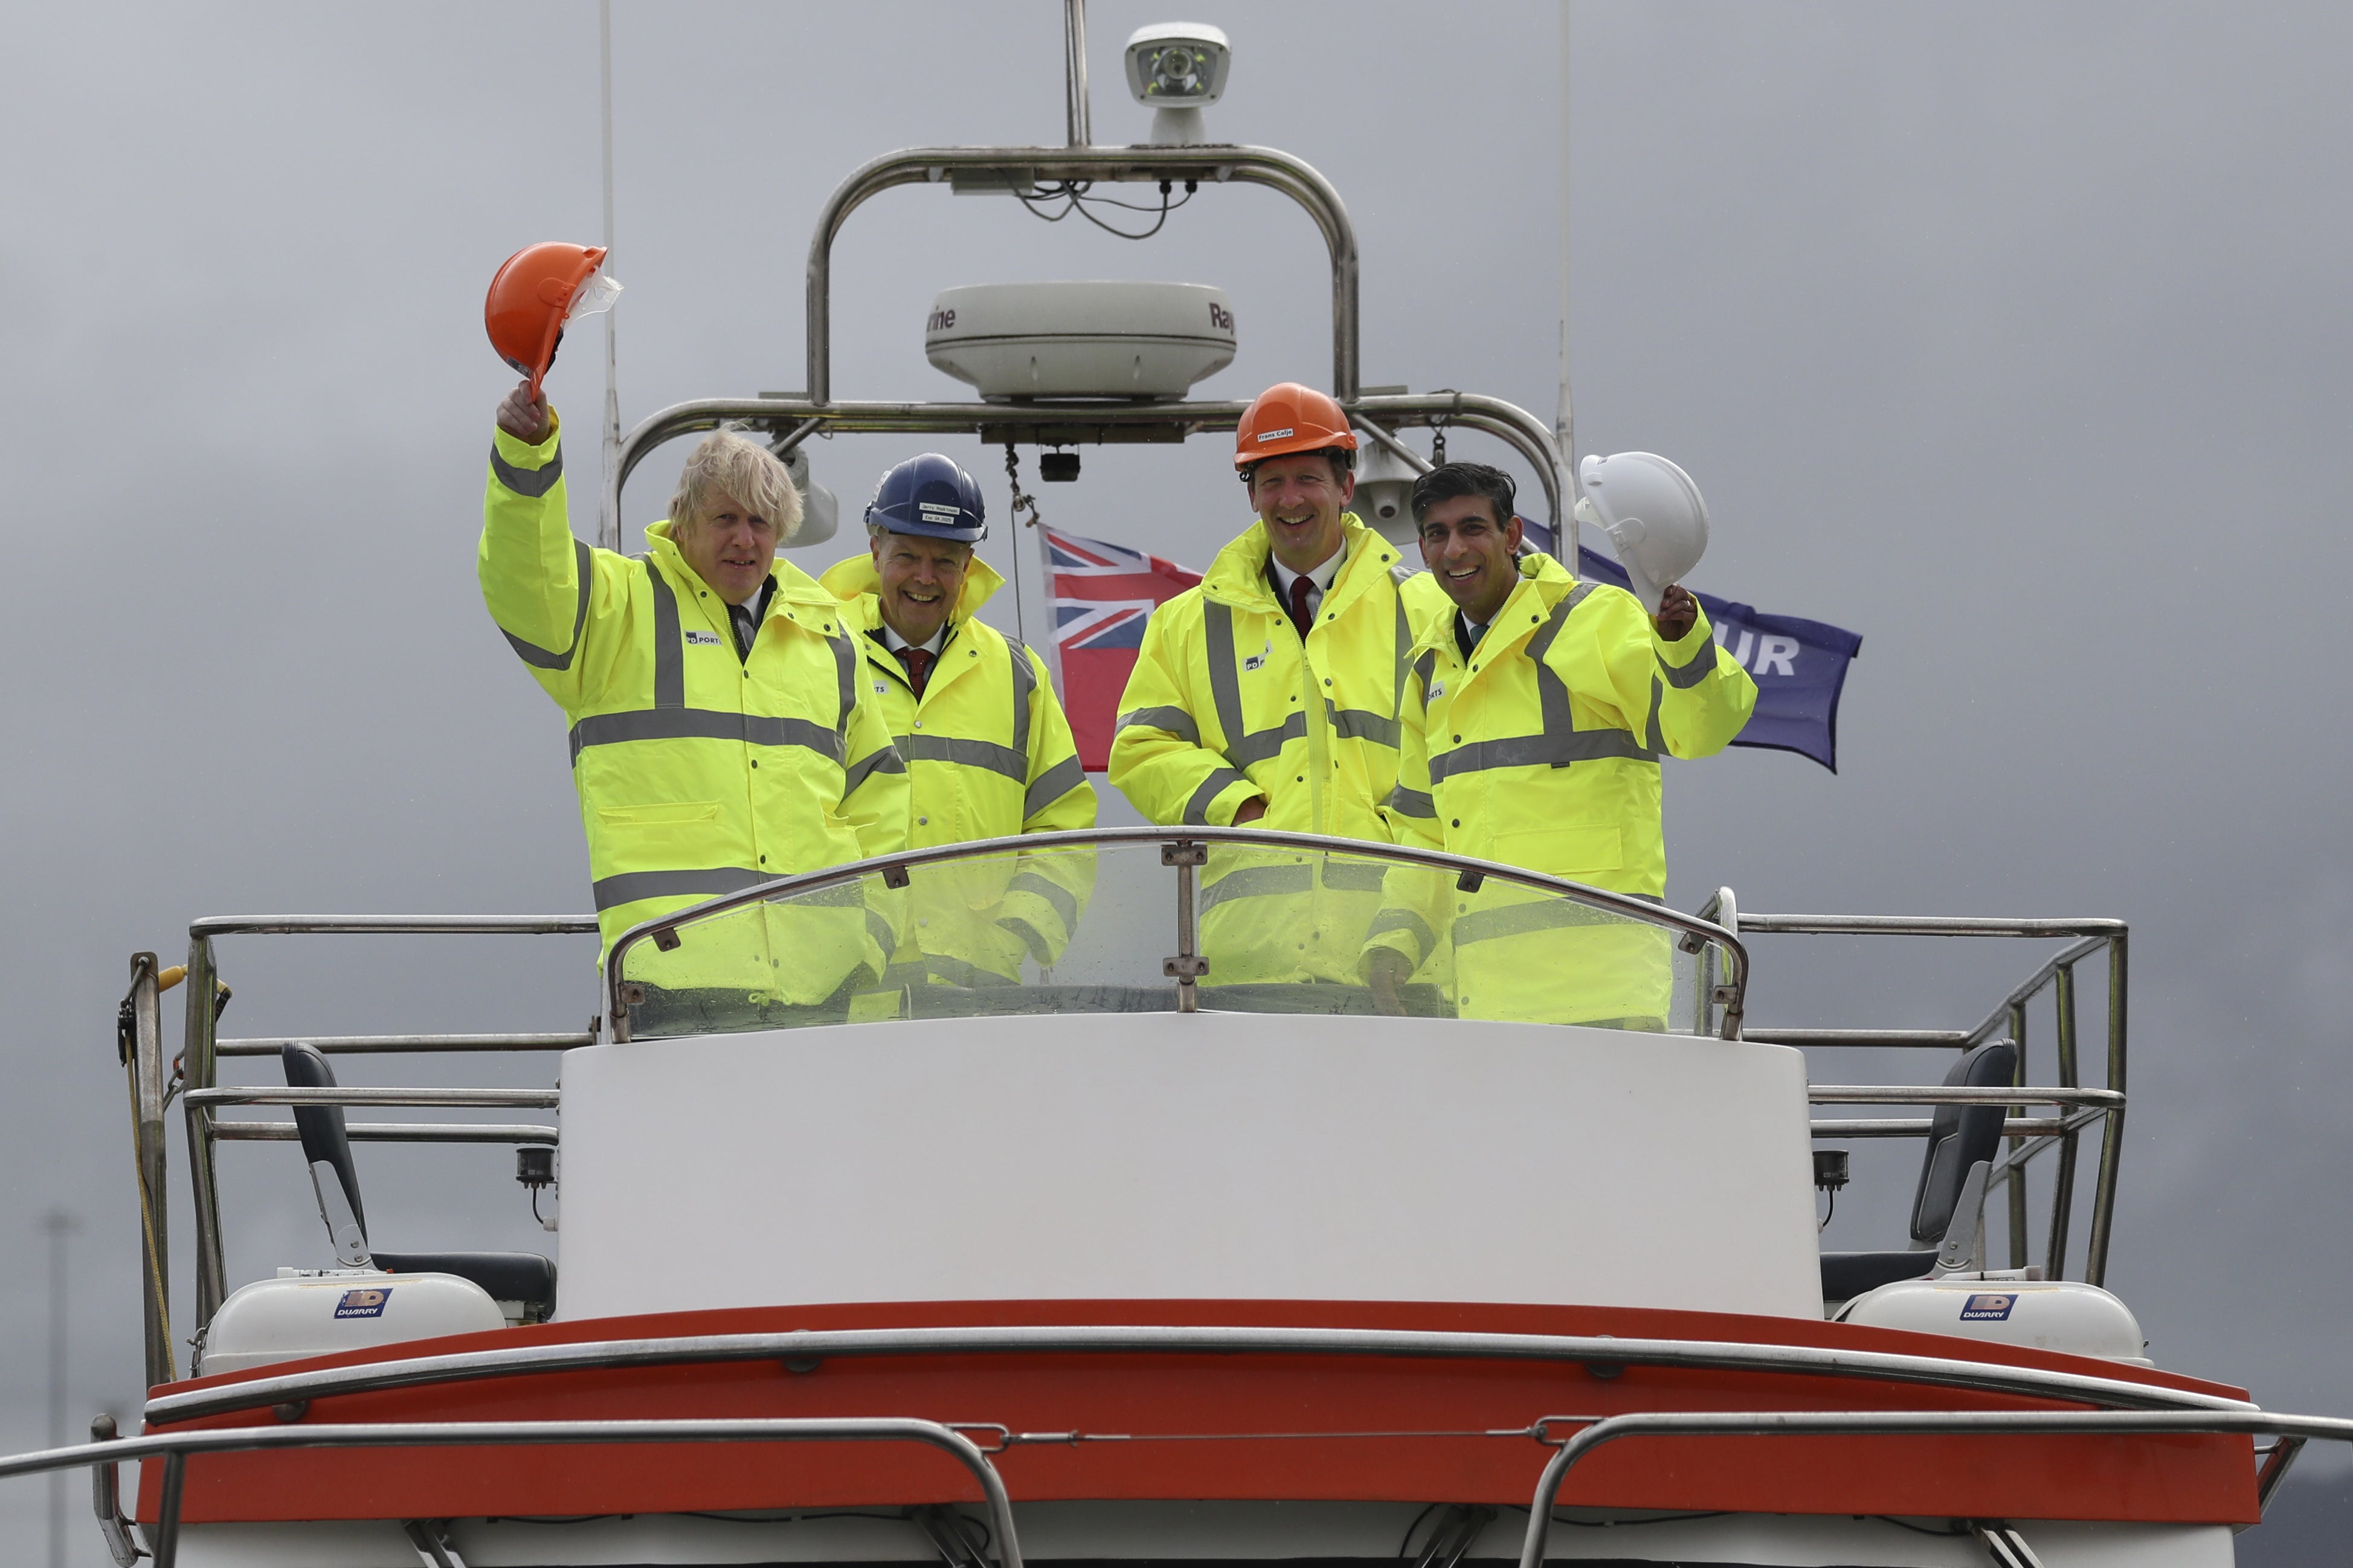 Boris Johnson, left, and Rishi Sunak, right, aboard a boat on the River Tees during a visit to Teesport in Middlesbrough in March 2021